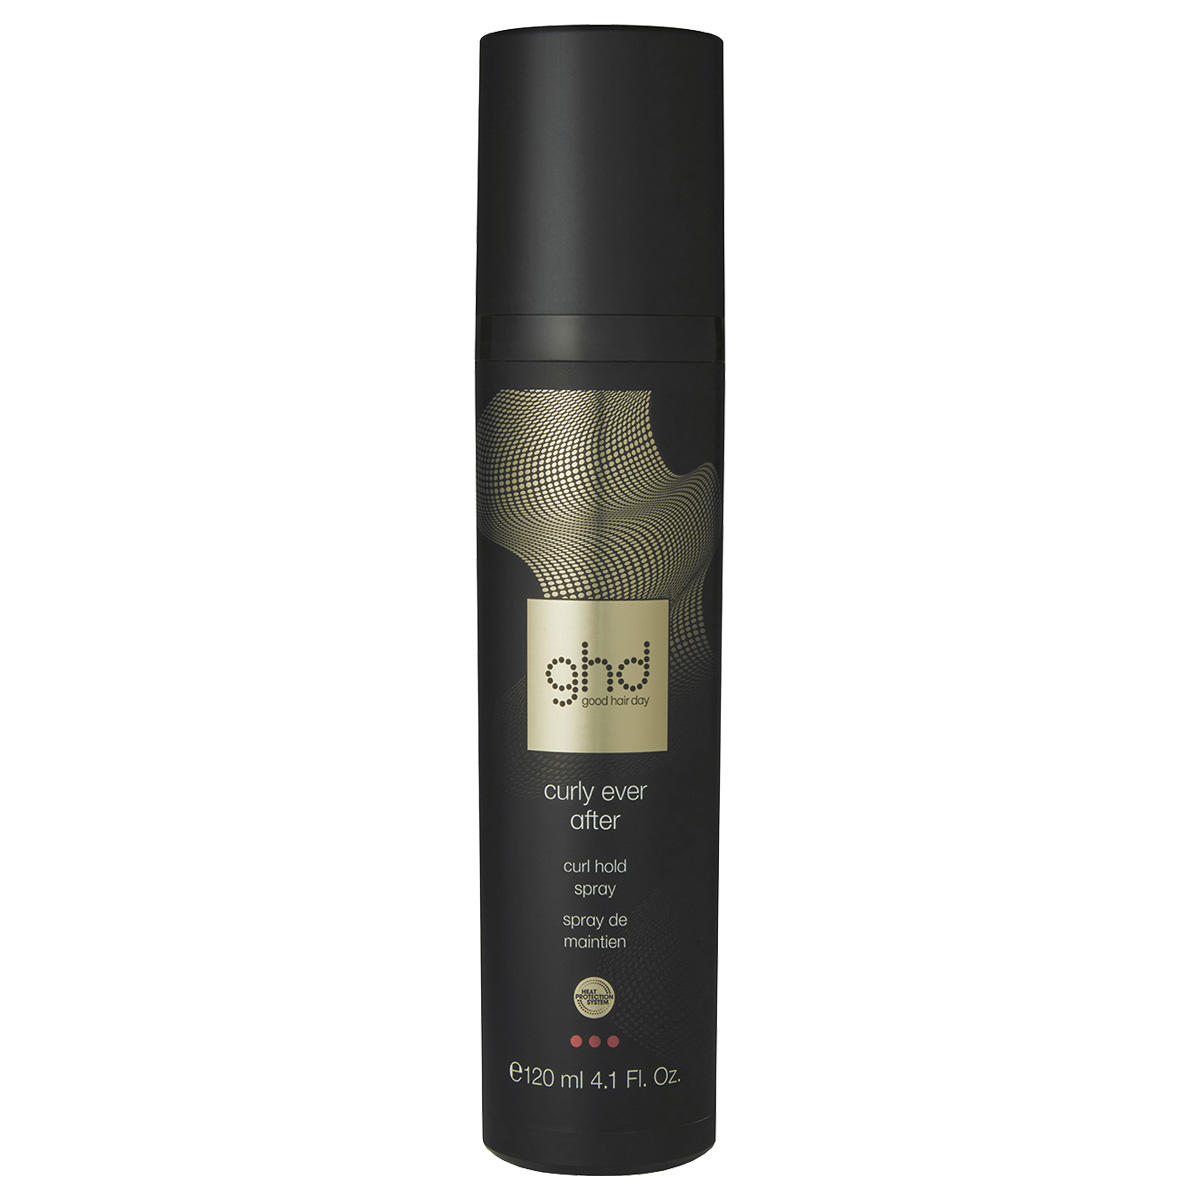 ghd curly ever after - curl hold spray 120 ml - 1